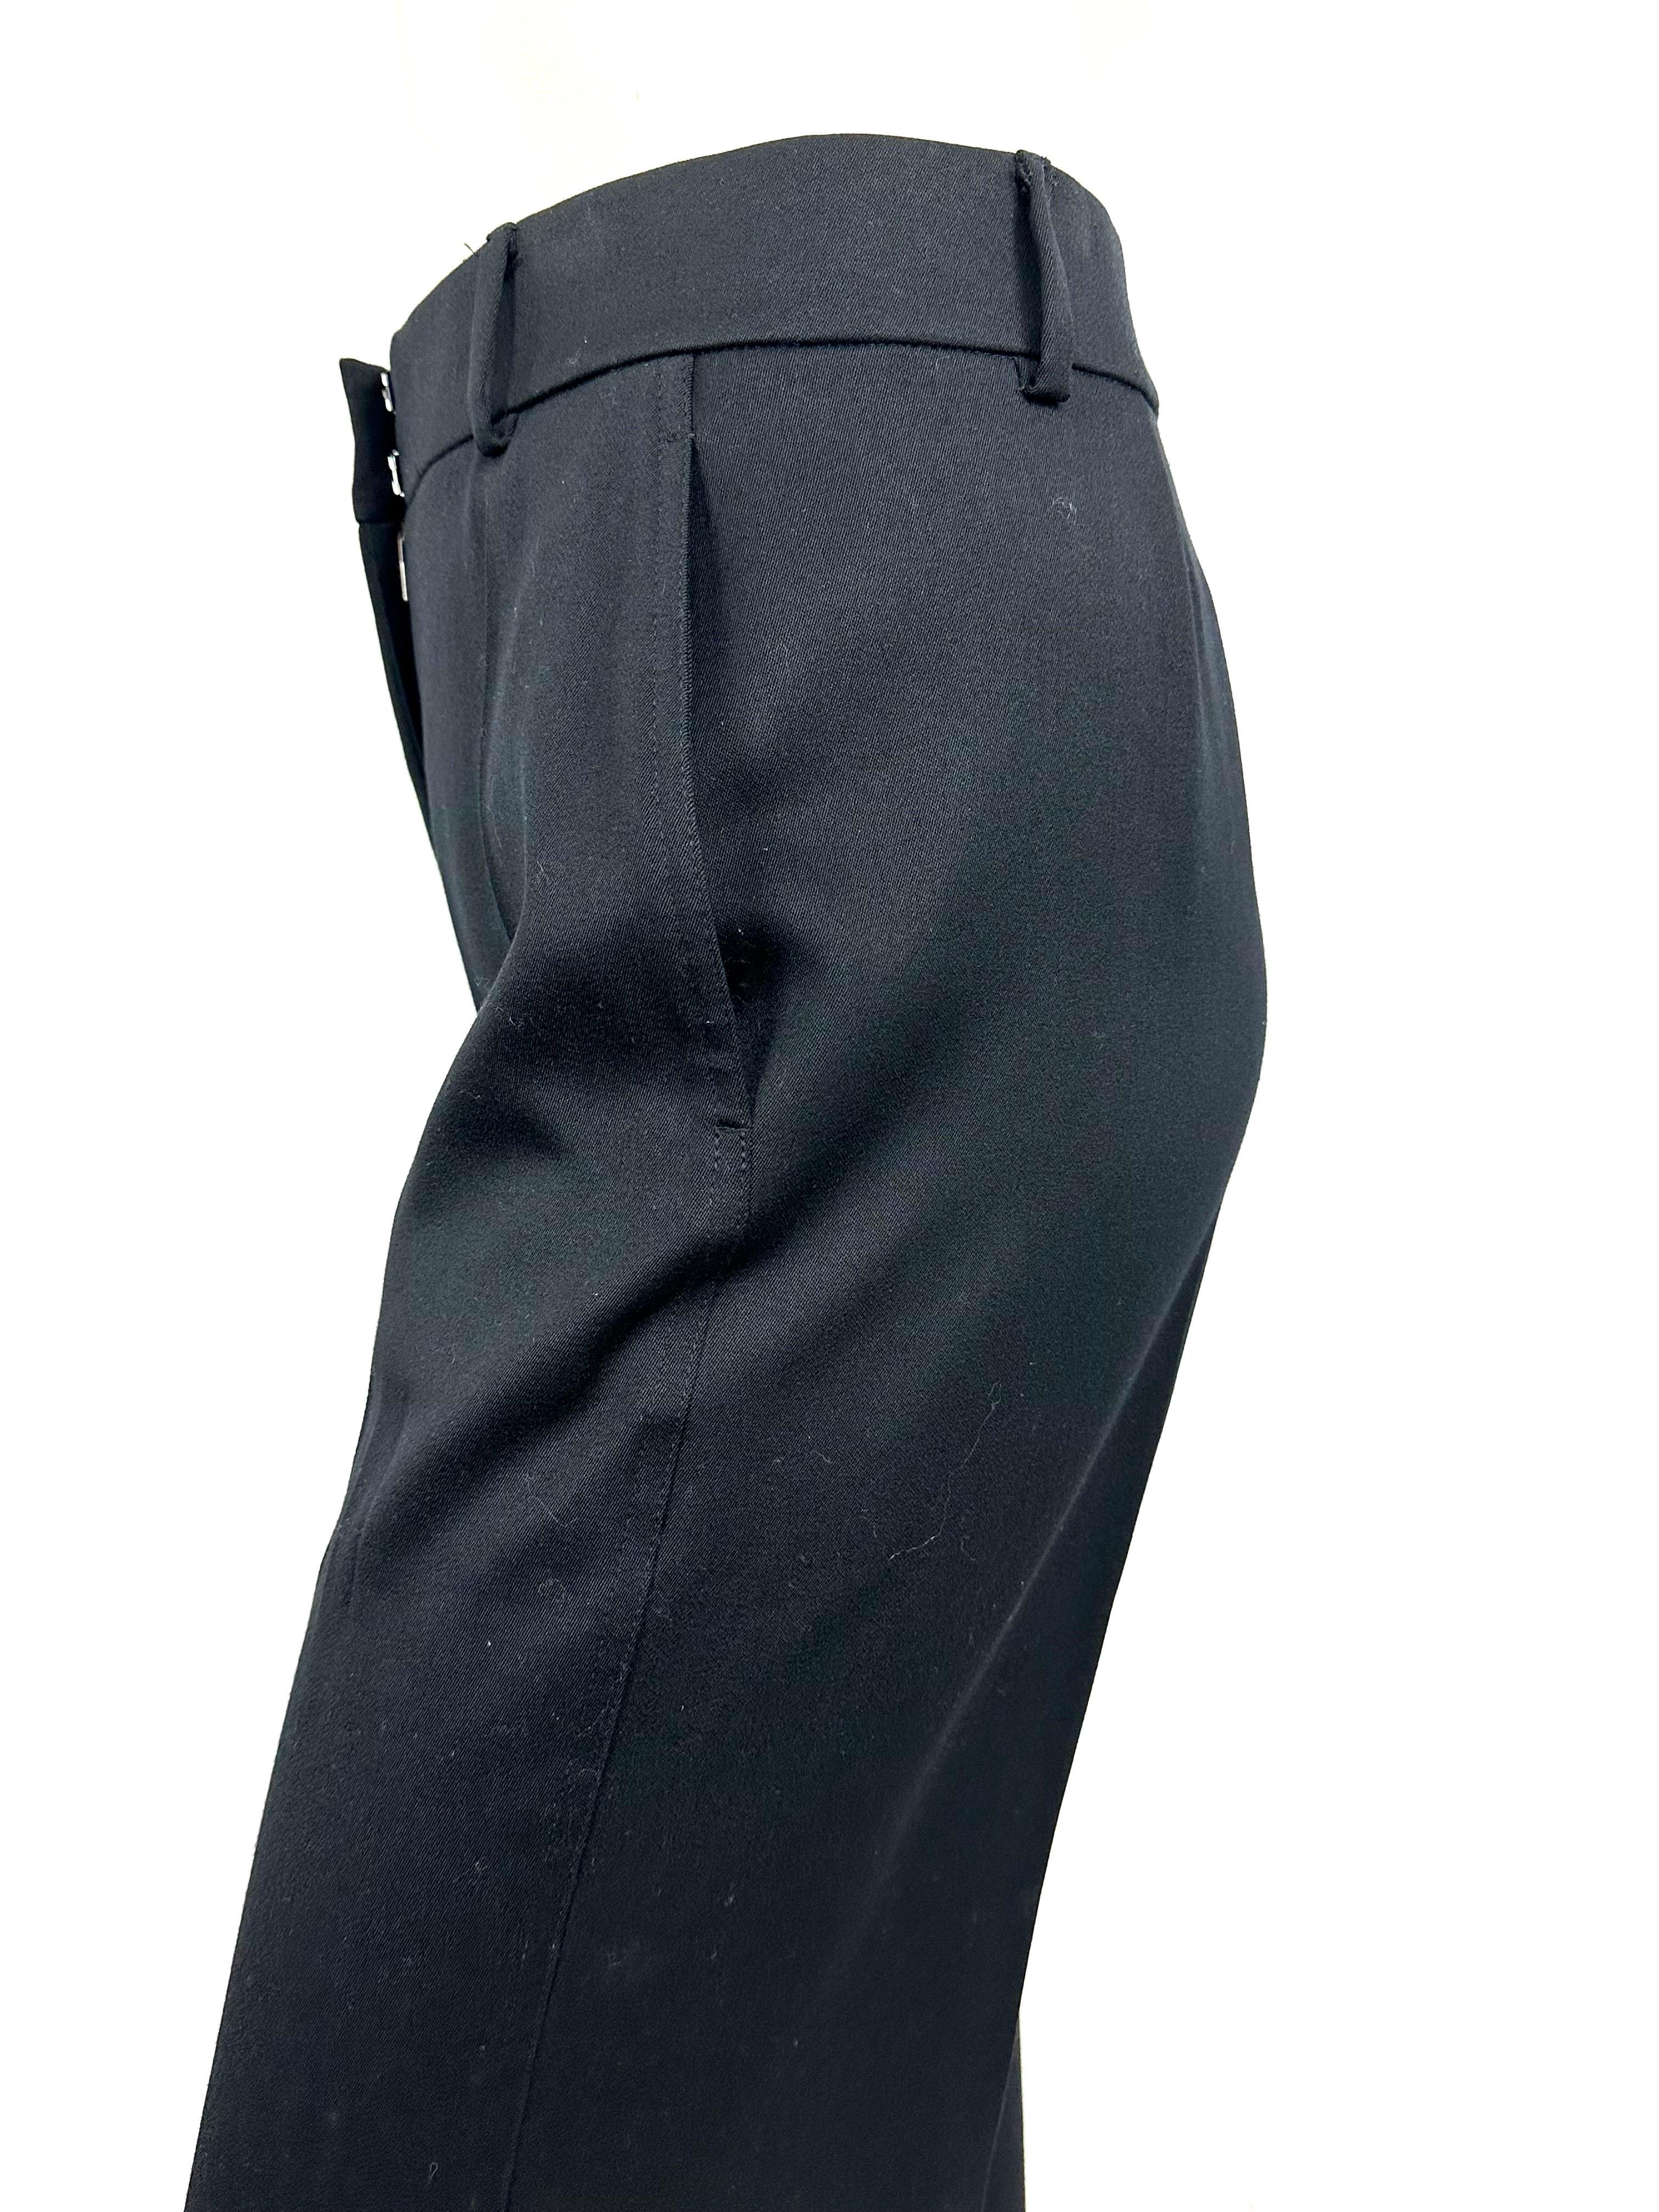 Vintage Ysl pants by Tom Ford in black wool from FW2003 collection In Good Condition For Sale In L'ESCALA, ES